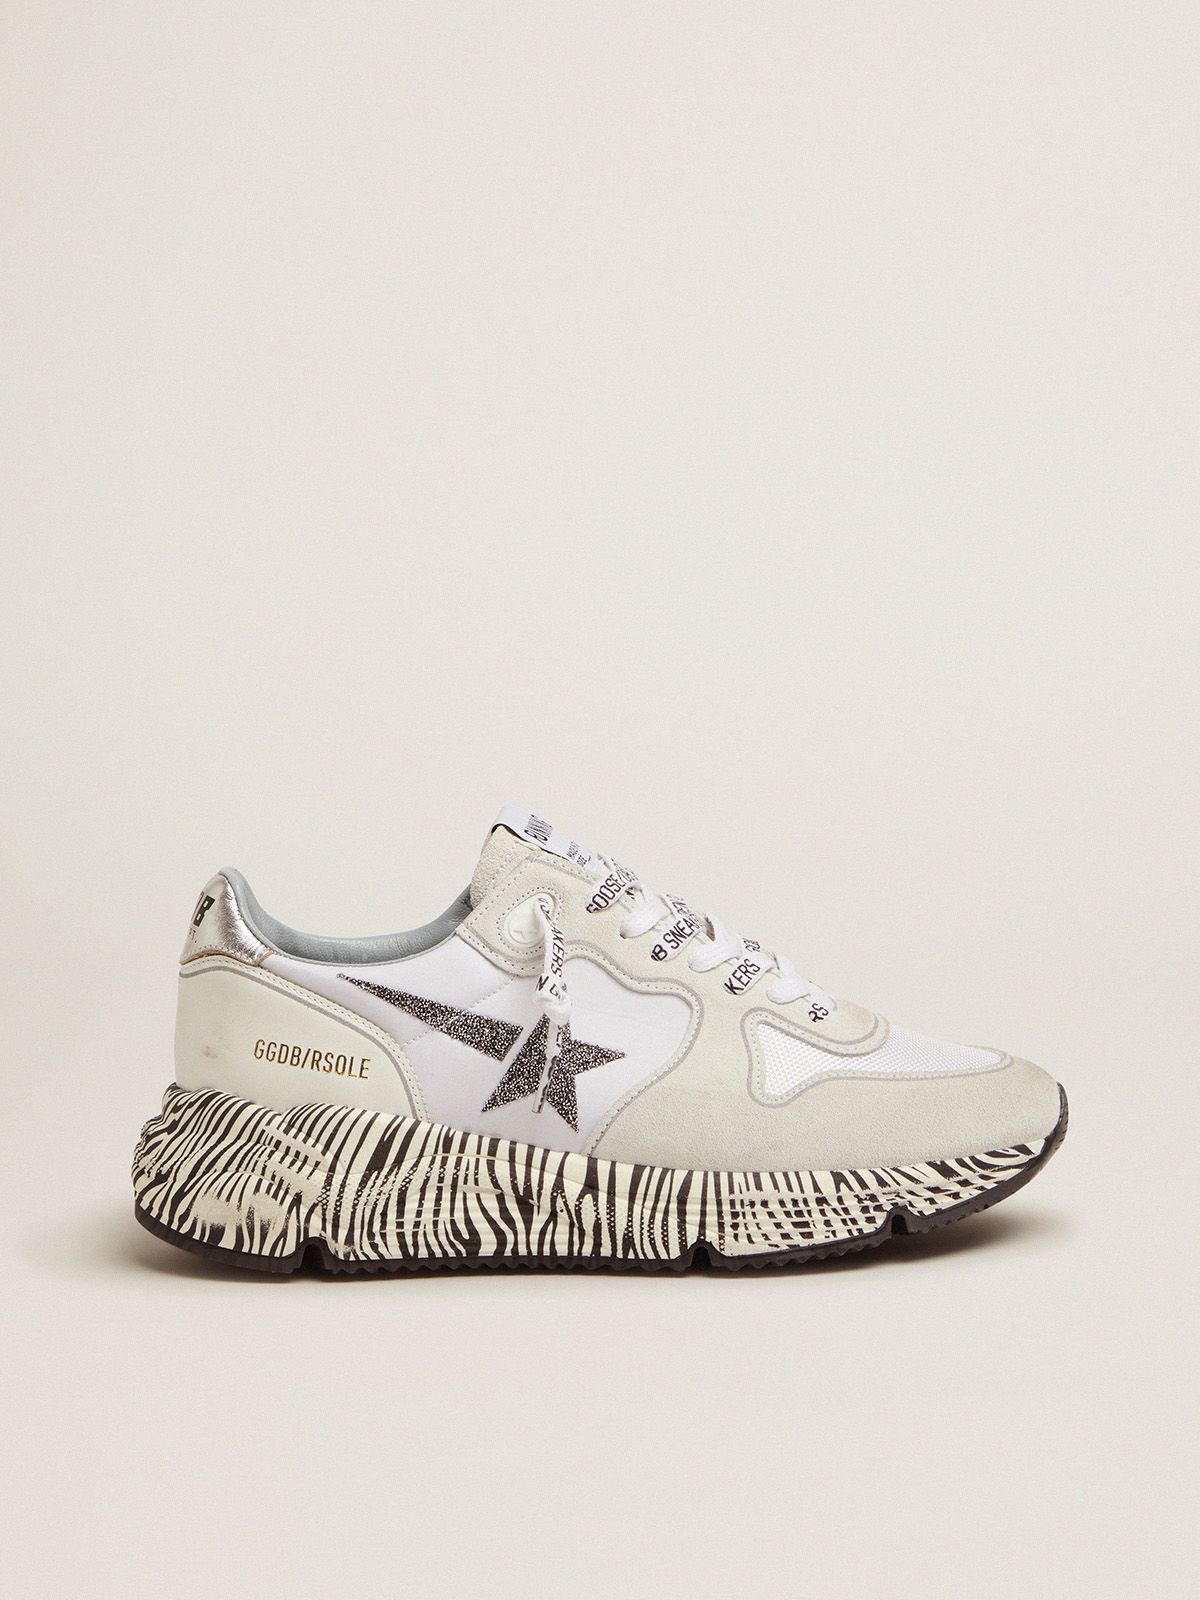 golden goose and sneakers zebra-print with Running crystals sole Sole